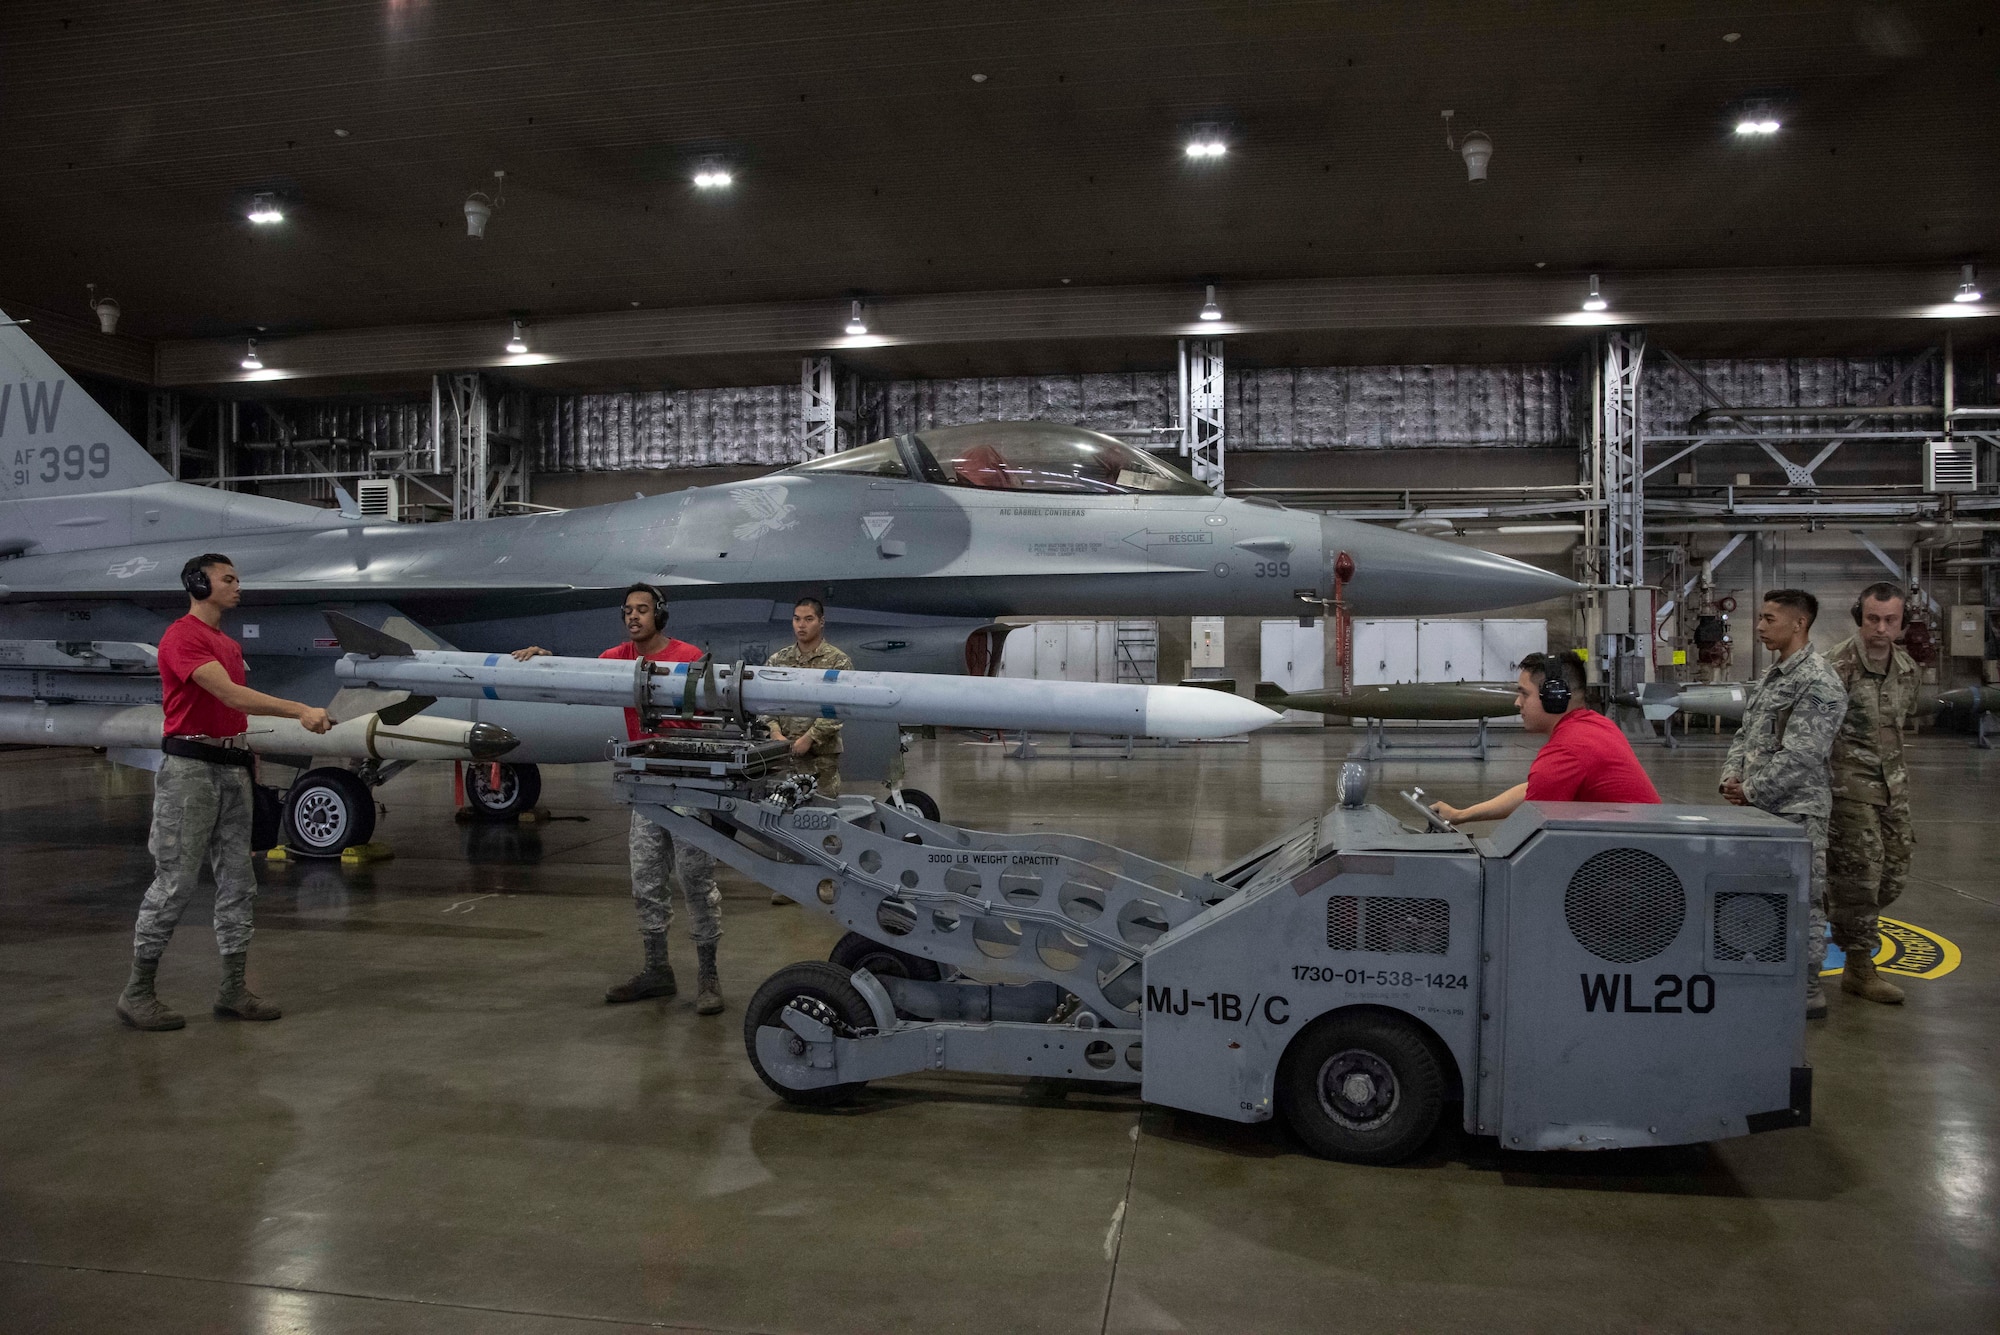 Airmen with the 13th Aircraft Maintenance Unit load munitions onto an F-16 Fighting Falcon during the third quarter load competition at Misawa Air Base, Japan, Oct. 25, 2019. Weapons load crew Airmen provide safe, reliable and effective aircraft and munitions to remain mission-capable and help deter our advisories in the Indo-Pacific region. (U.S. Air Force photo by Airman 1st Class China M. Shock)